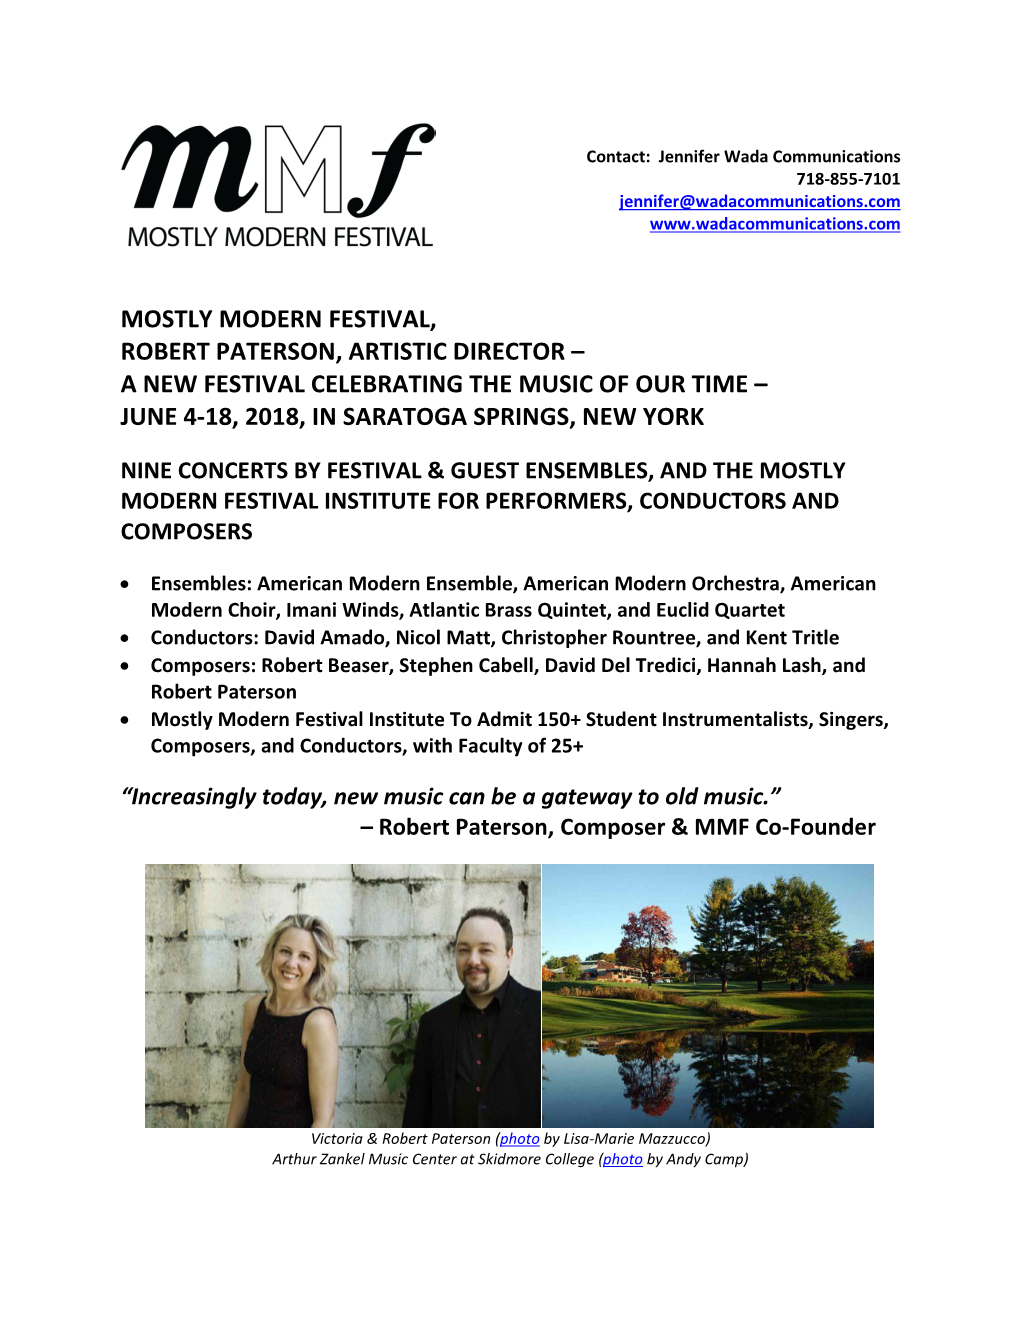 Mostly Modern Festival, Robert Paterson, Artistic Director – a New Festival Celebrating the Music of Our Time – June 4-18, 2018, in Saratoga Springs, New York